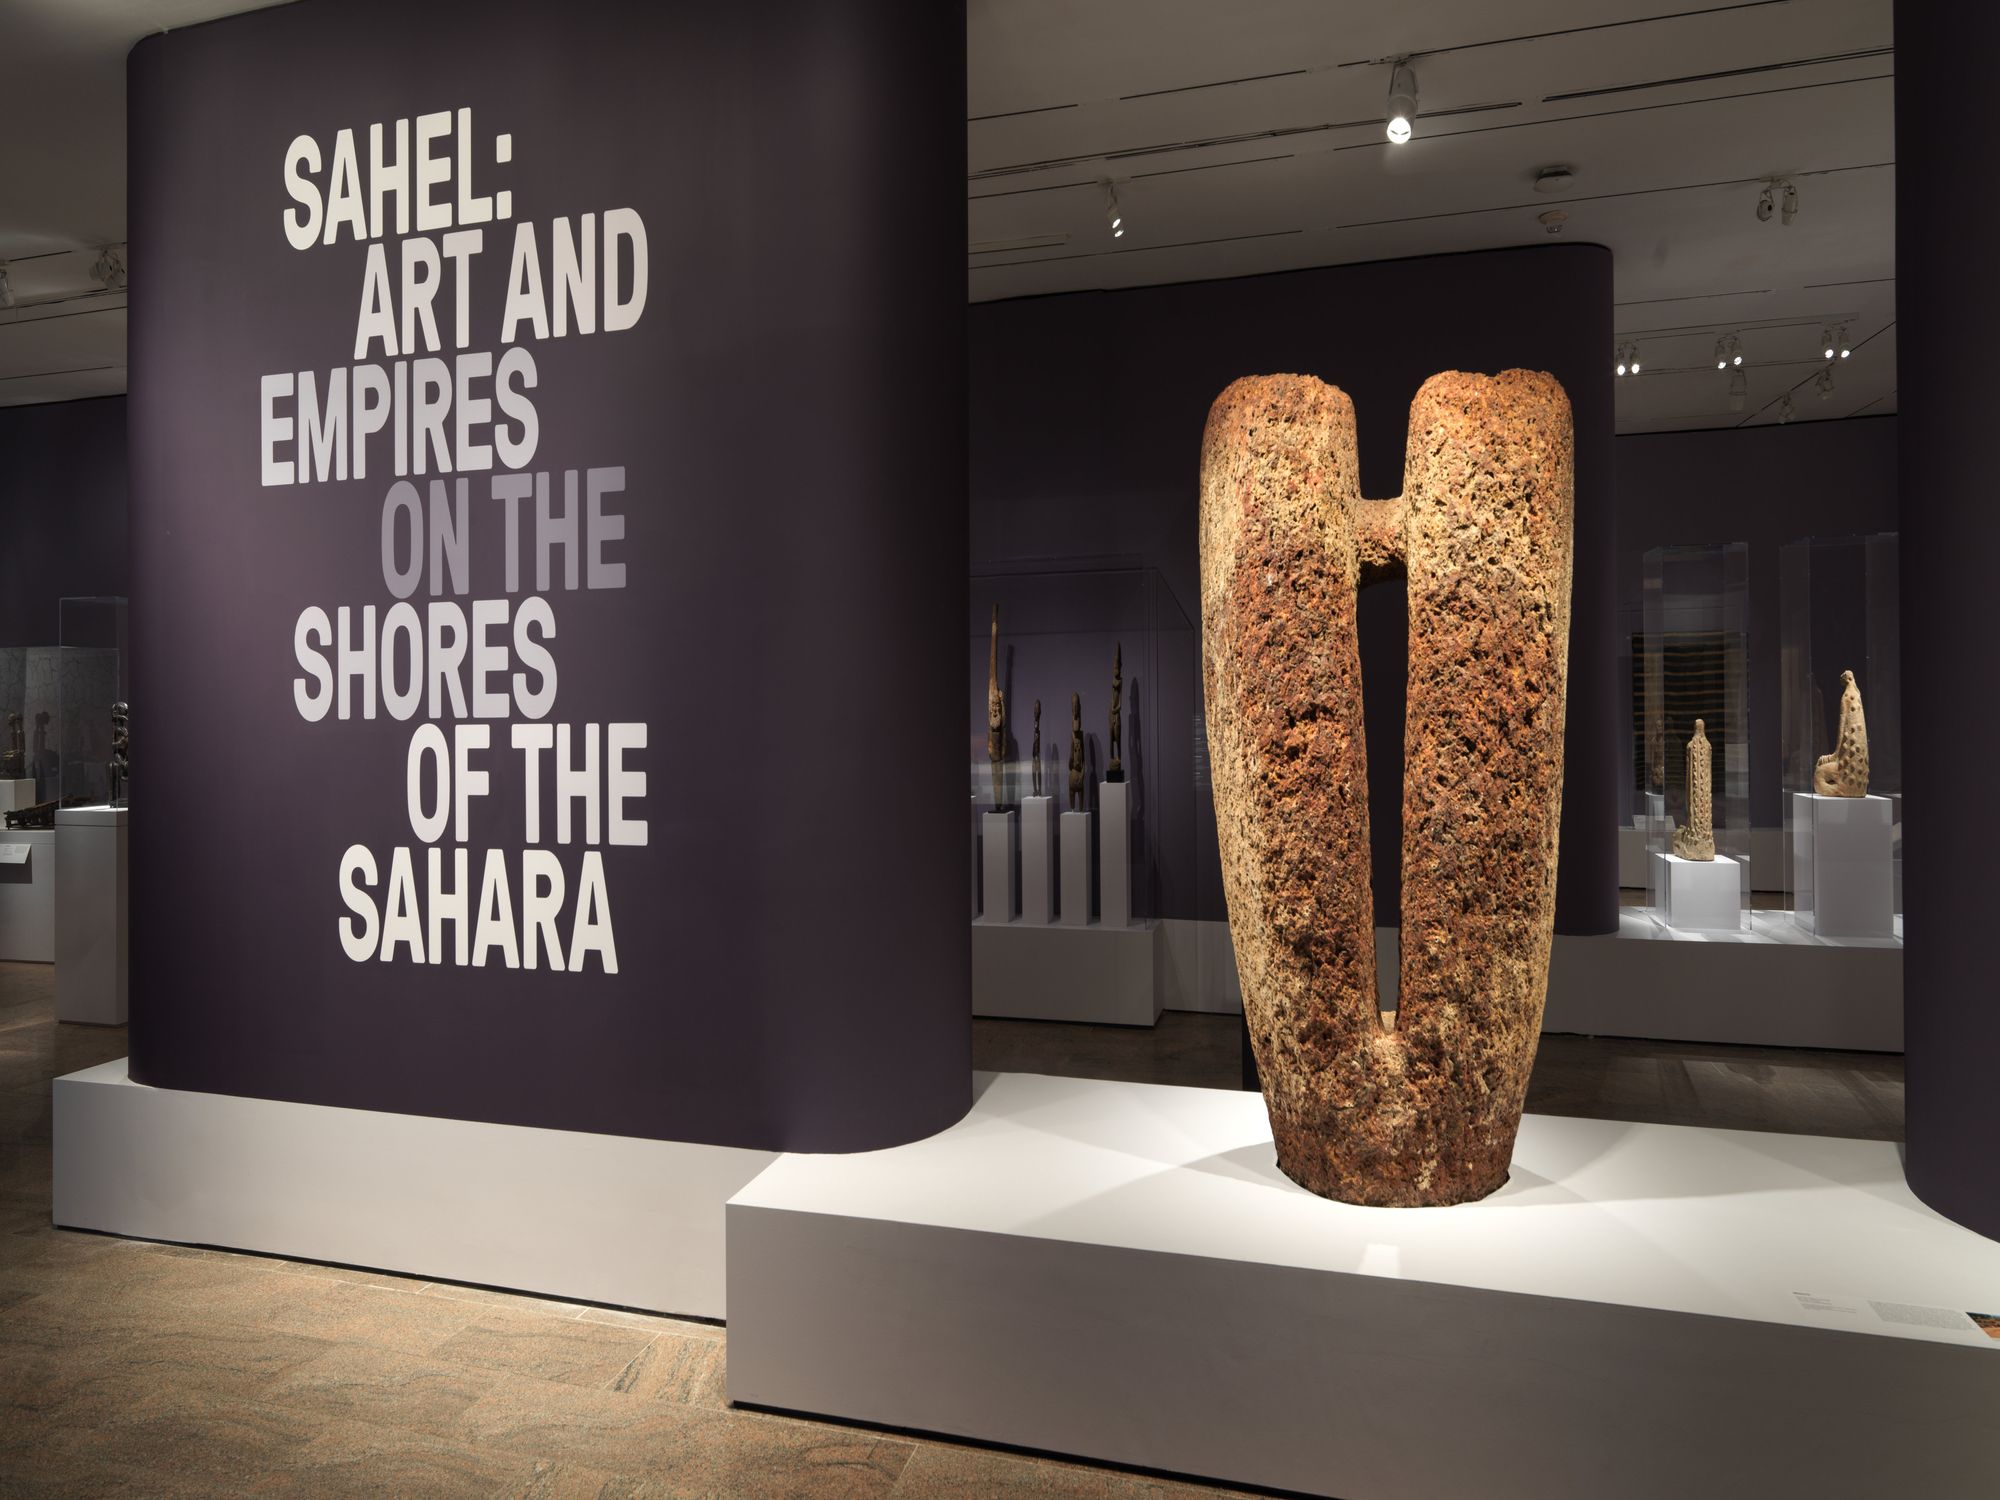 The Met's New Exhibition Celebrates the Rich Artistic History of the Sahel Region